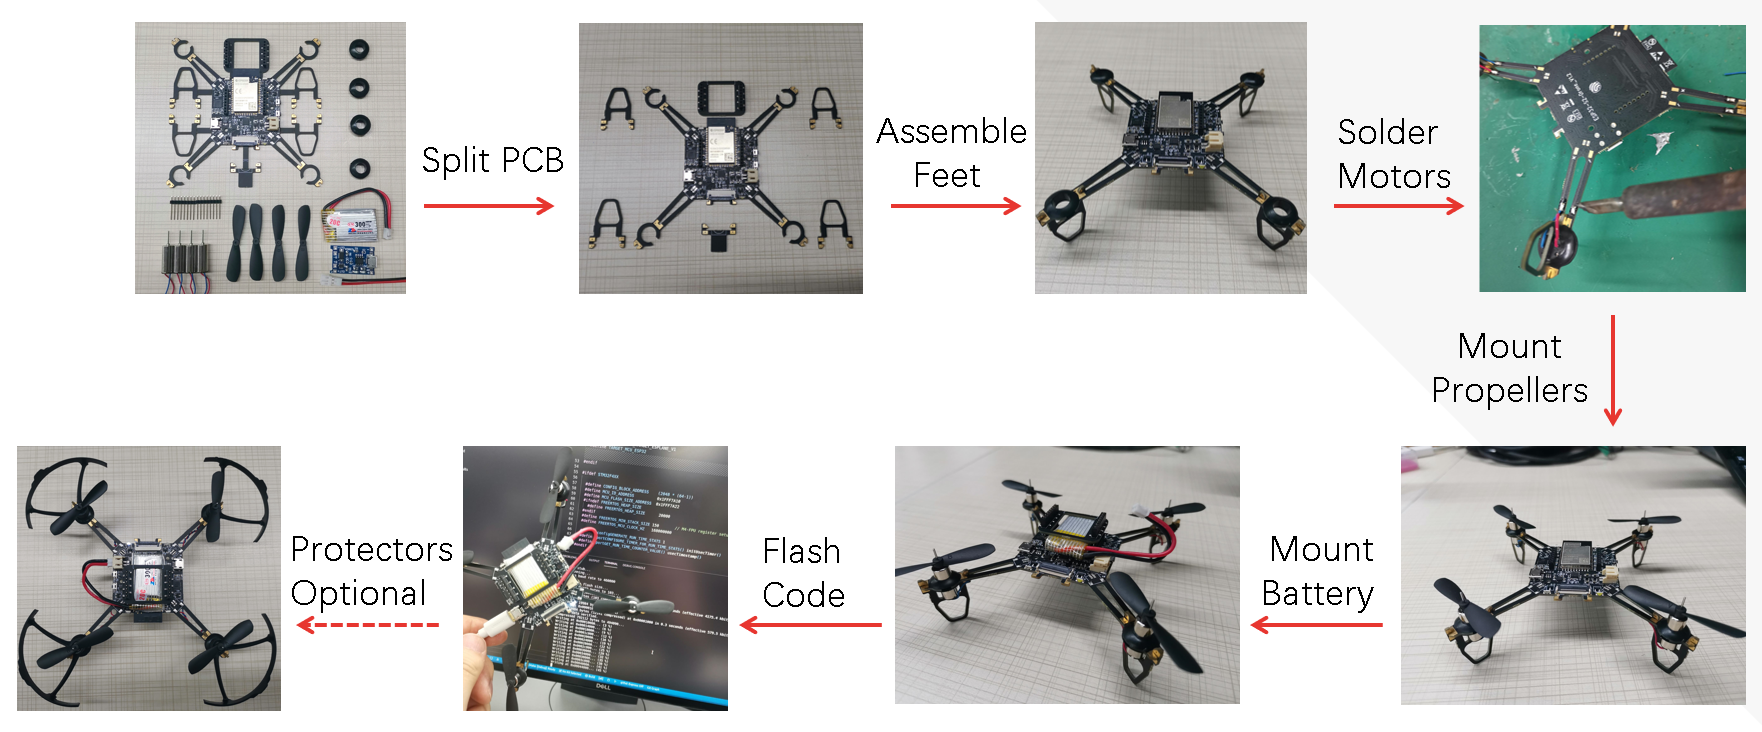 Affordable Innovation: ESP-Drone’s ESP32 Quadcopter Opens Doors for DIY Drone Enthusiasts